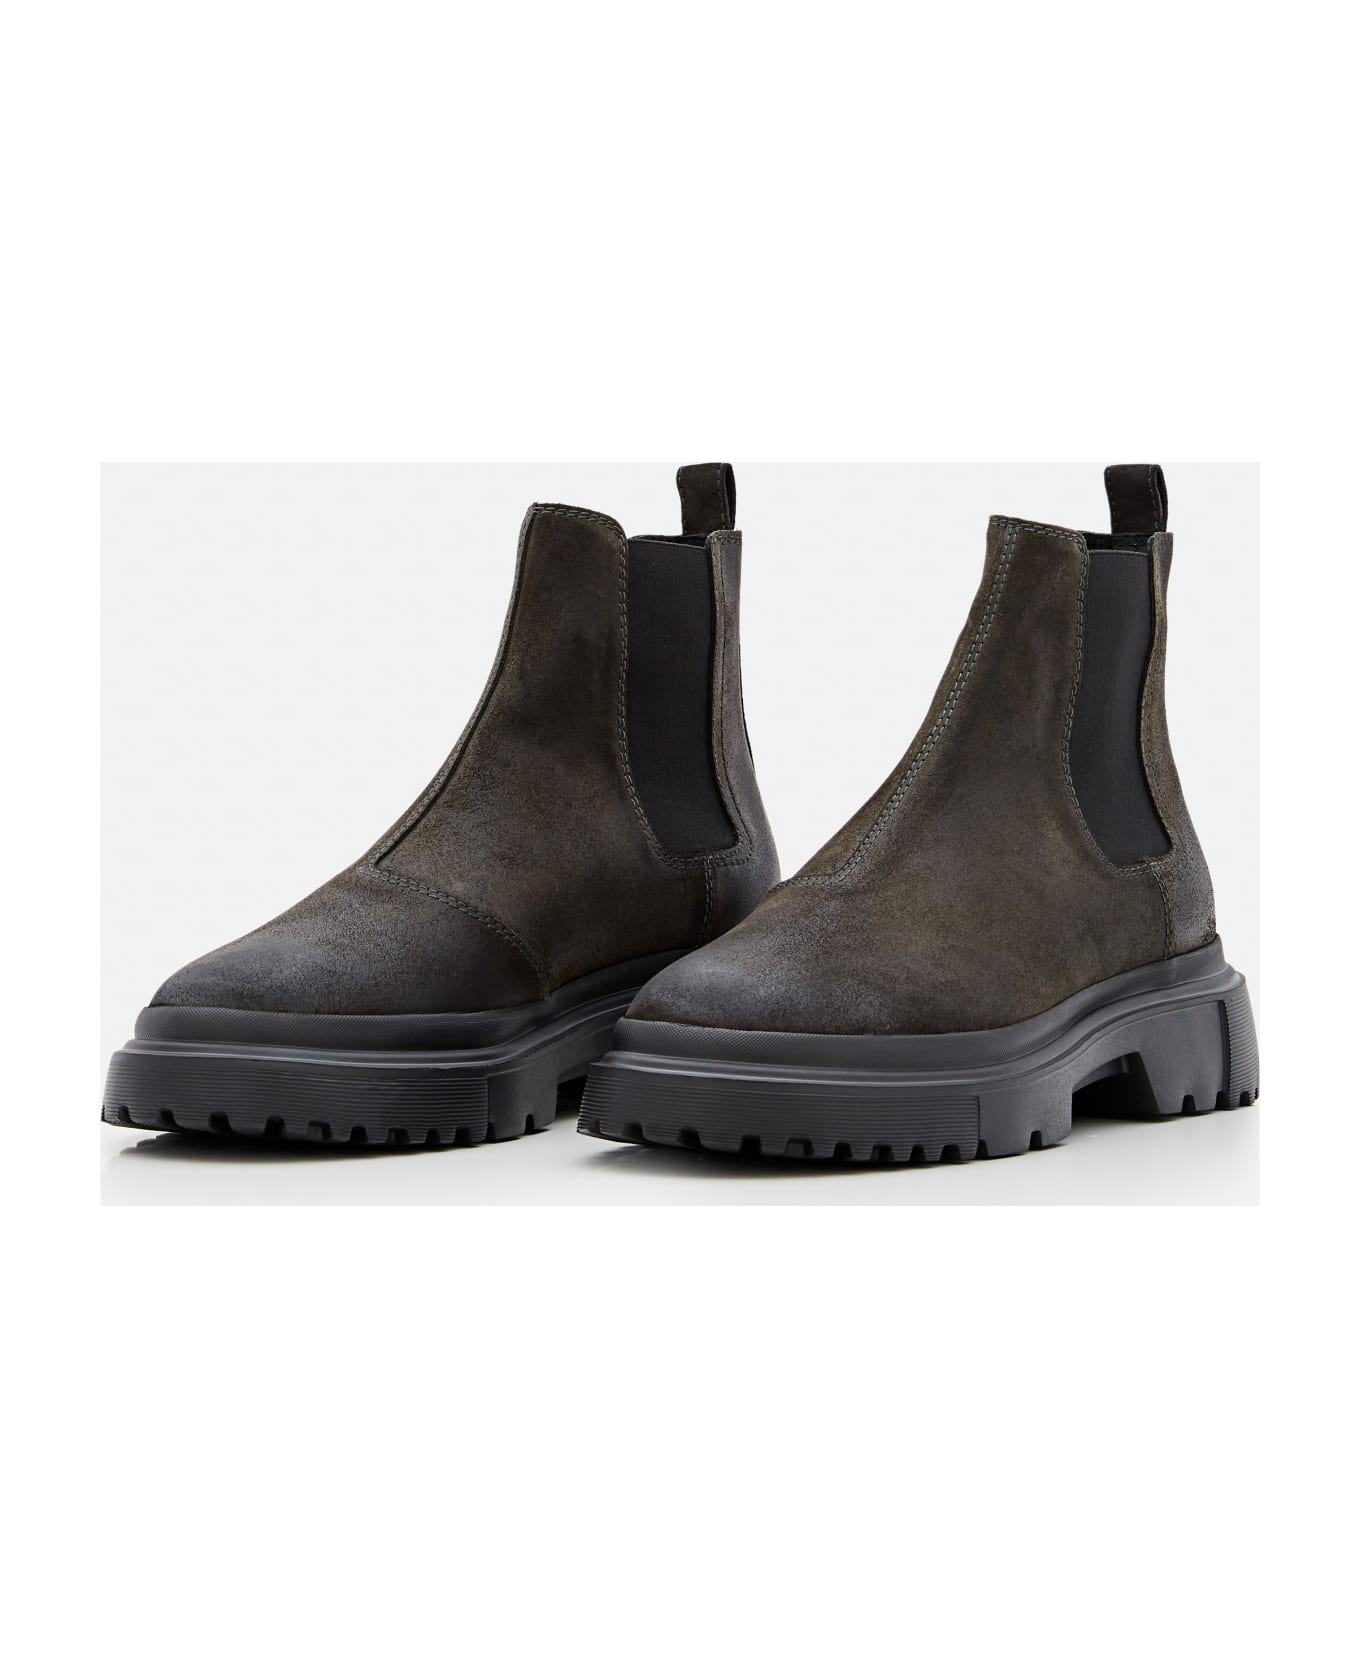 Hogan H629 Chelsea Ankle Boots - ANTRACITE